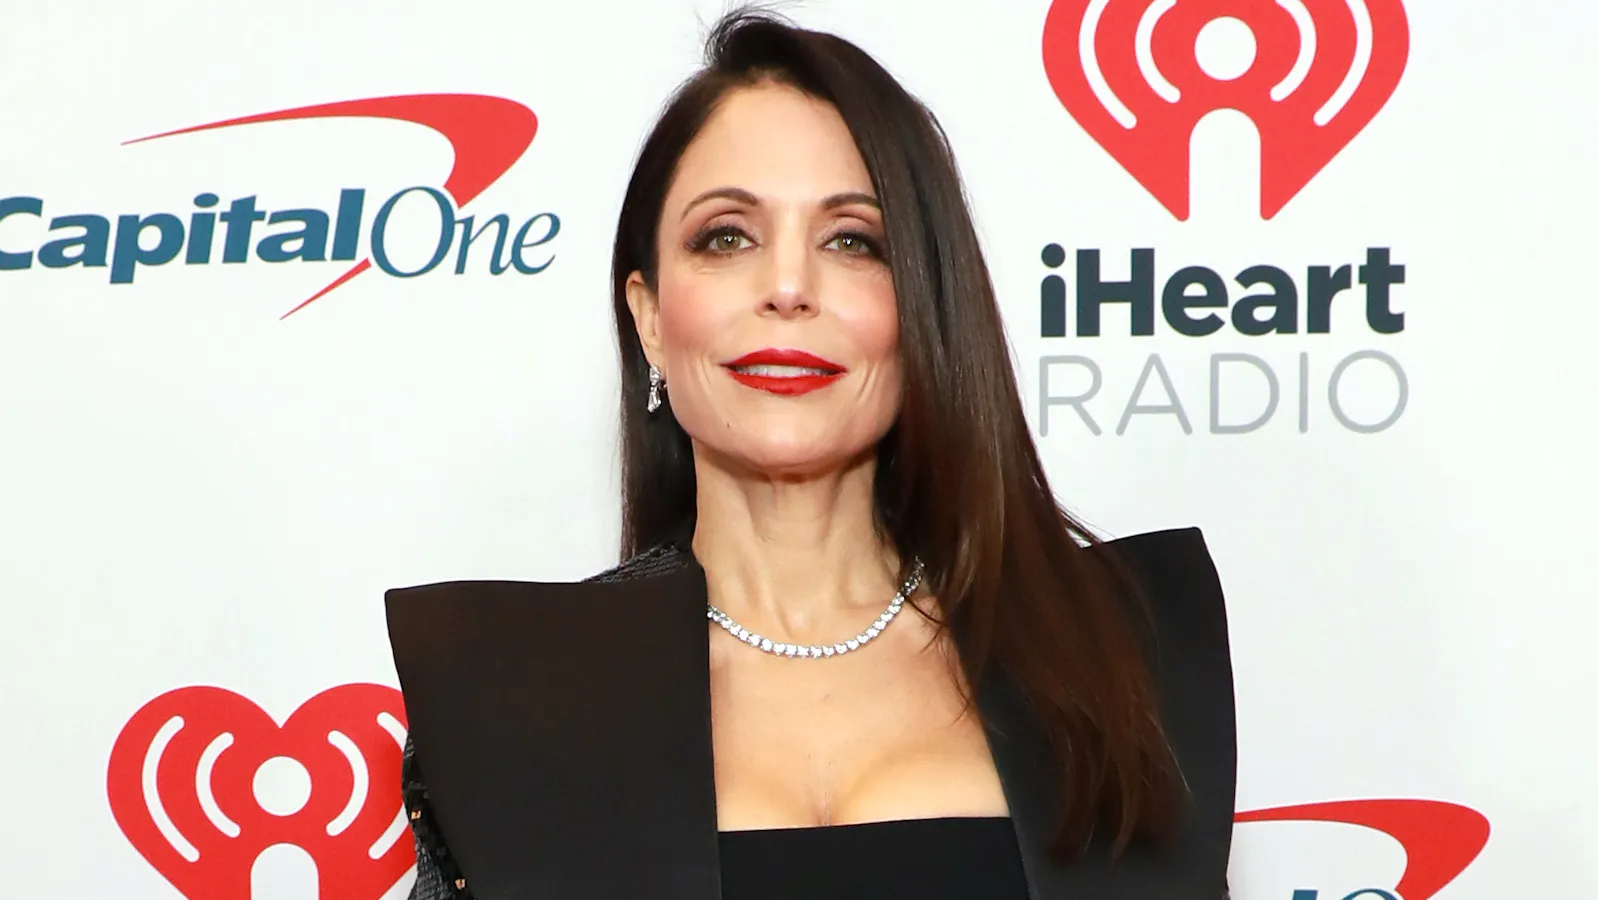 Bethenny Frankel - The Real Housewives of New York City